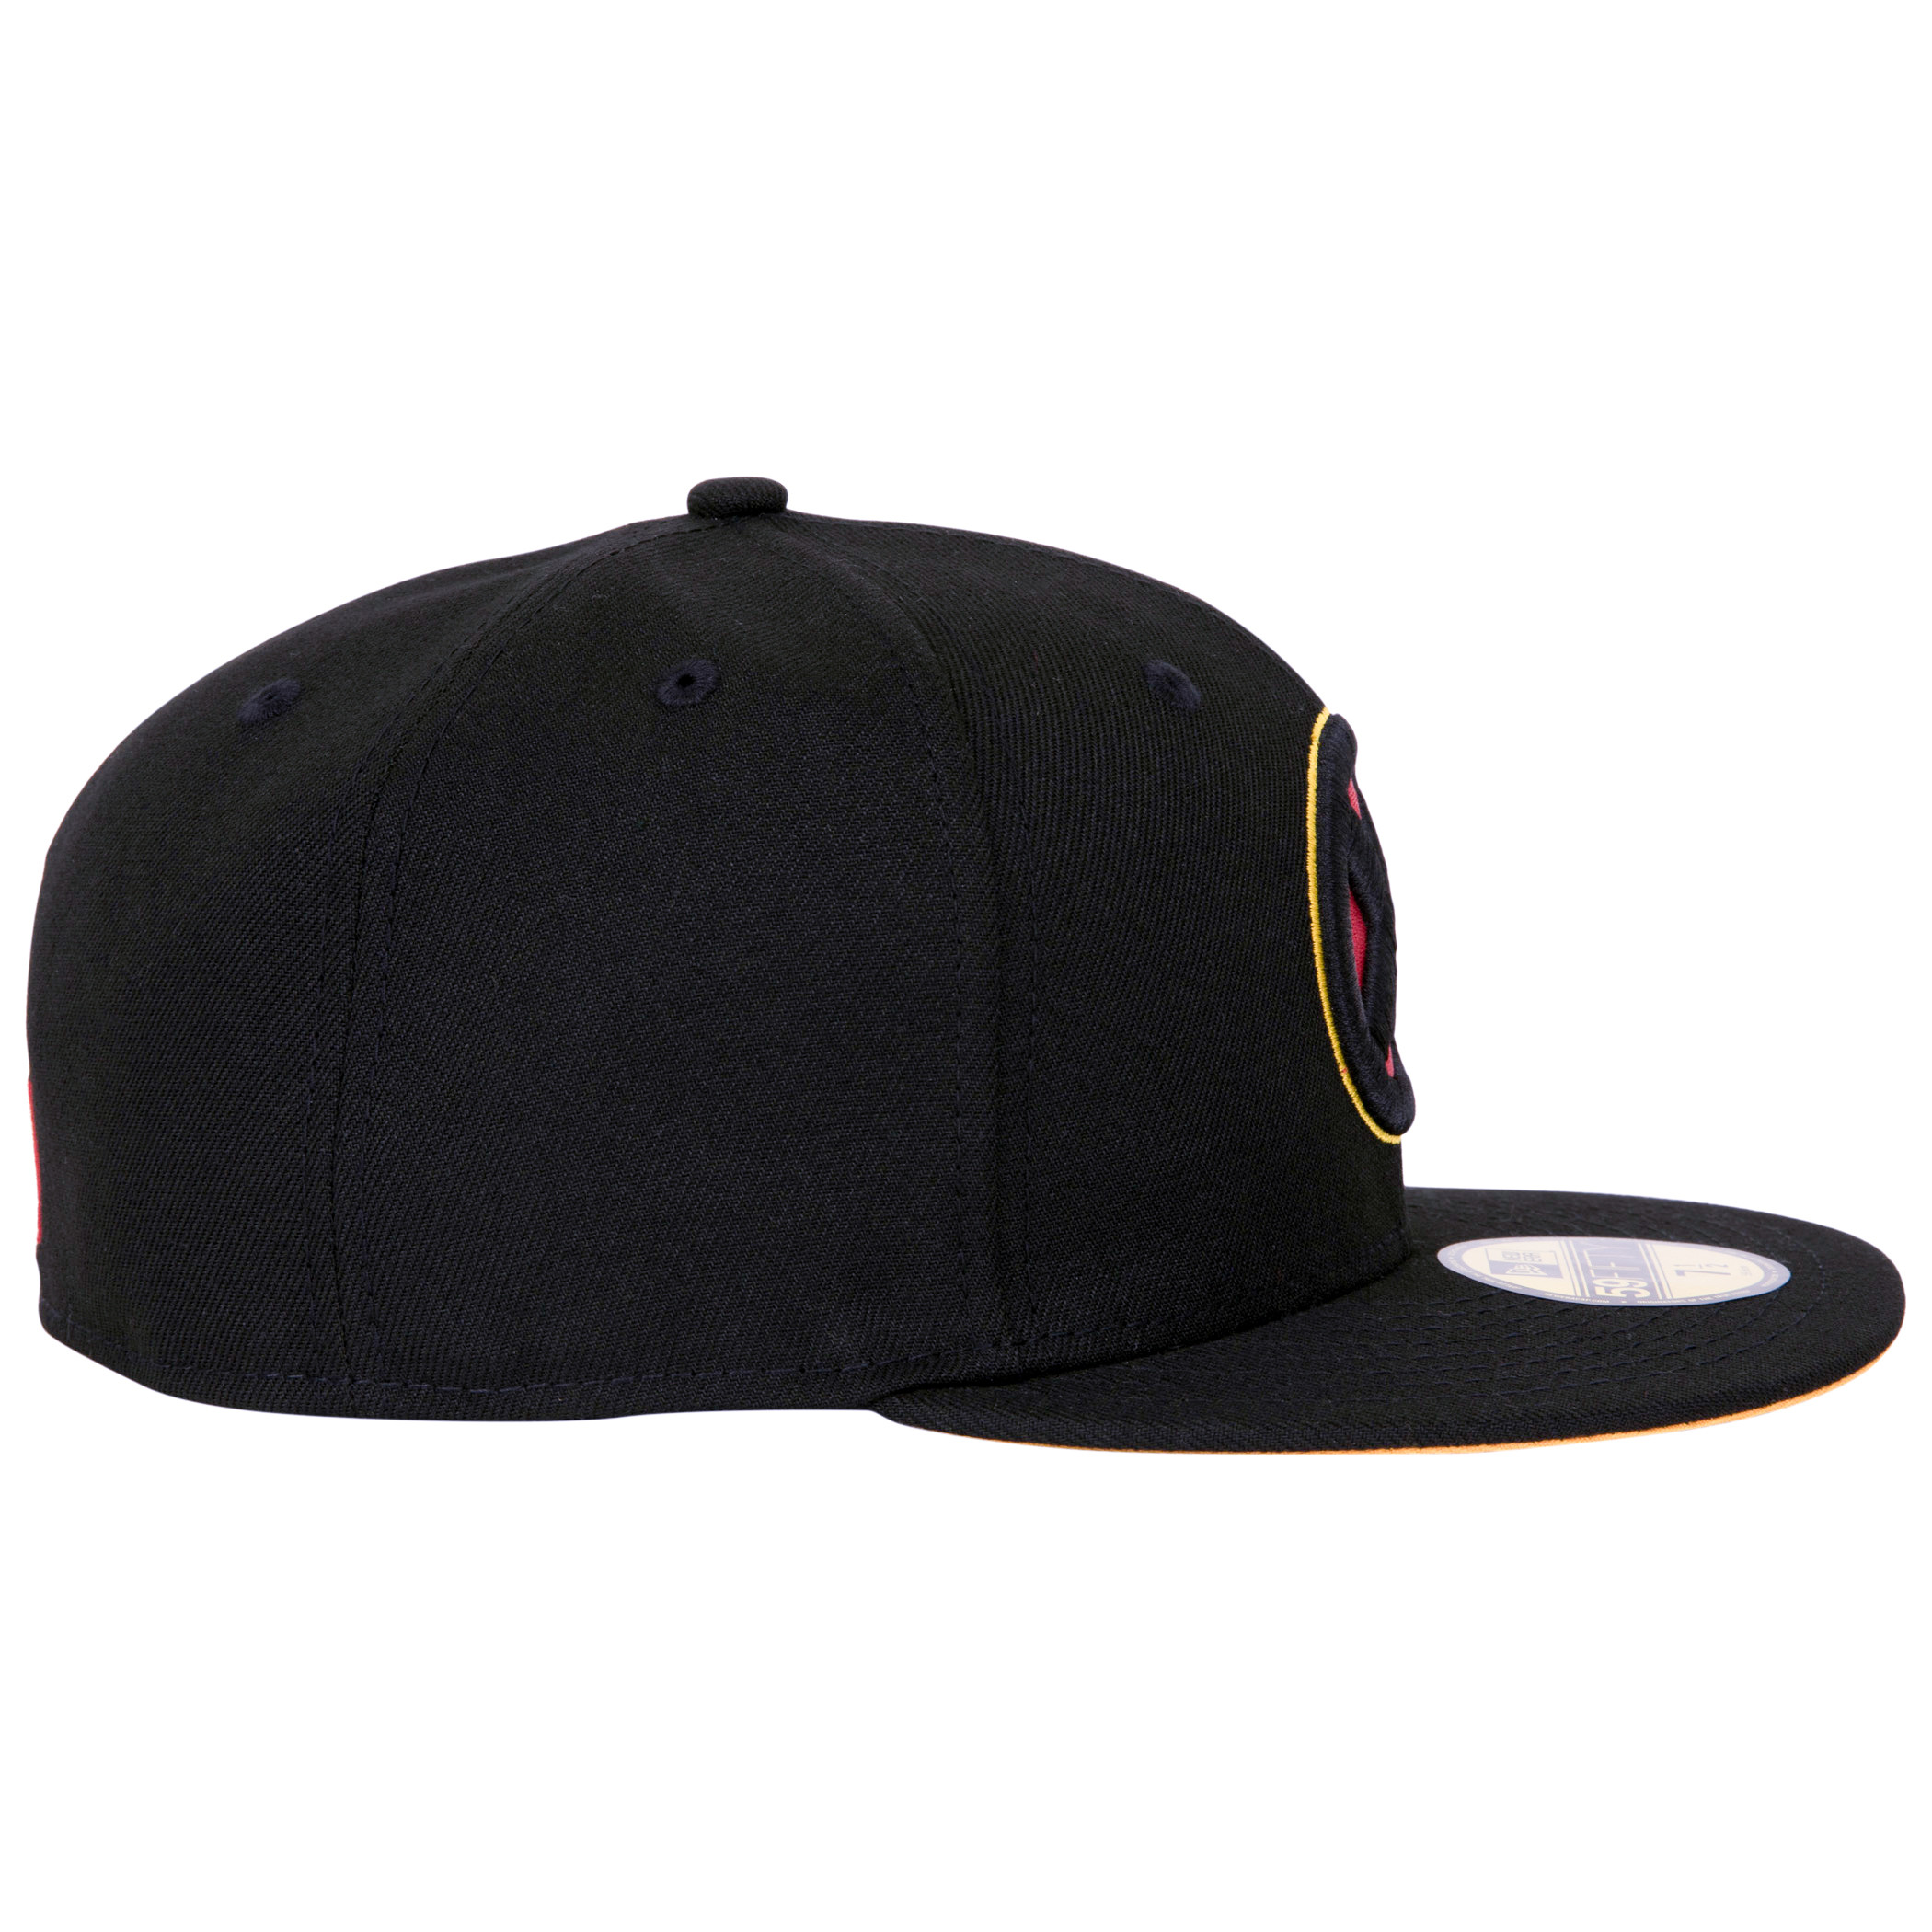 X-Men Logo Black Colorway New Era 59Fifty Fitted Hat Black